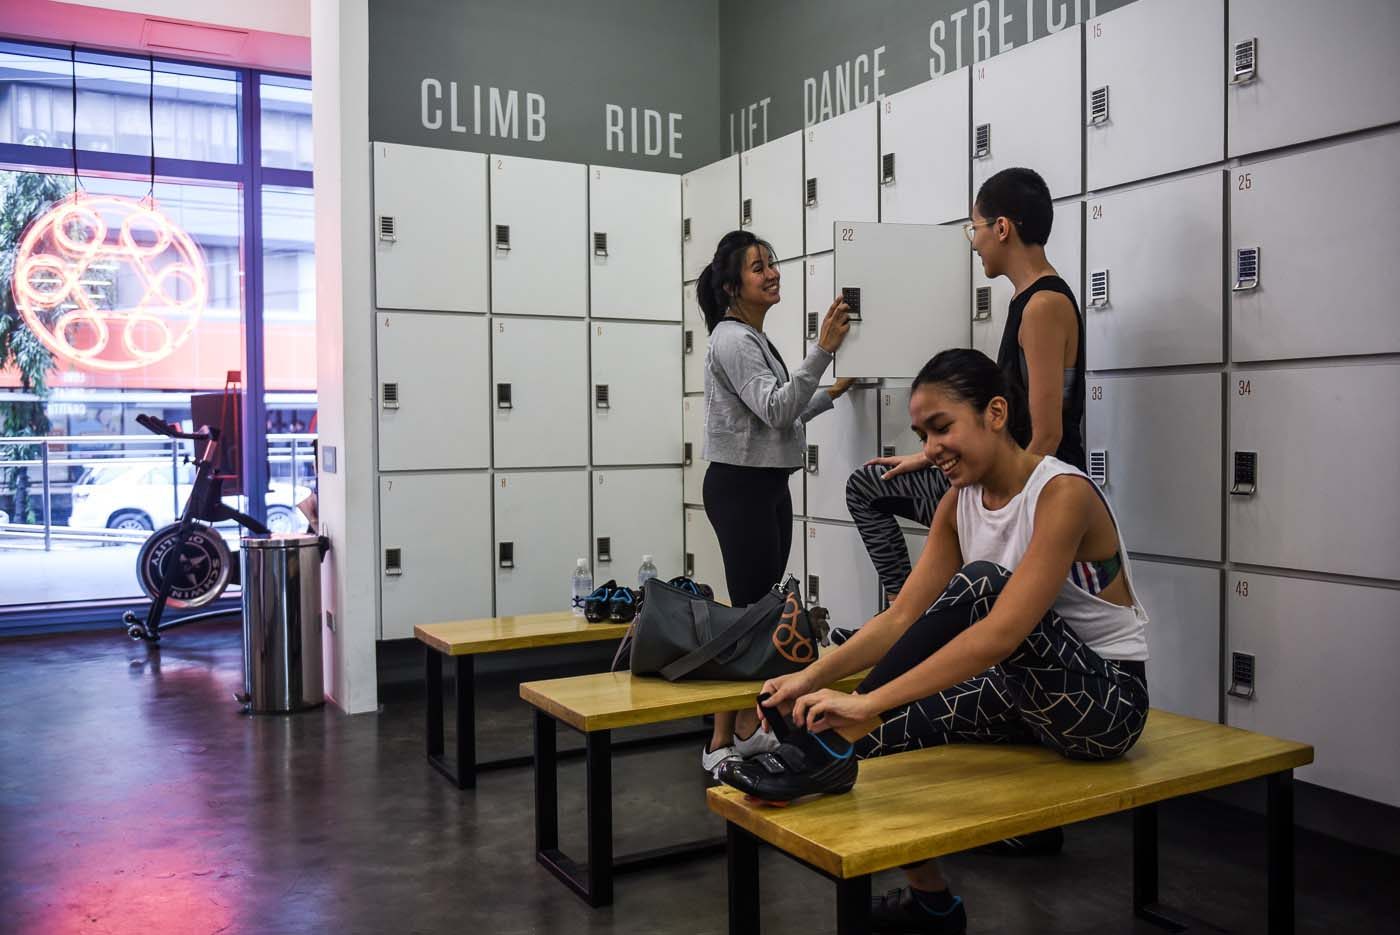 (L to R) Instructor Pia with crew members Sherlaine and Marga by the studio's lockers.  